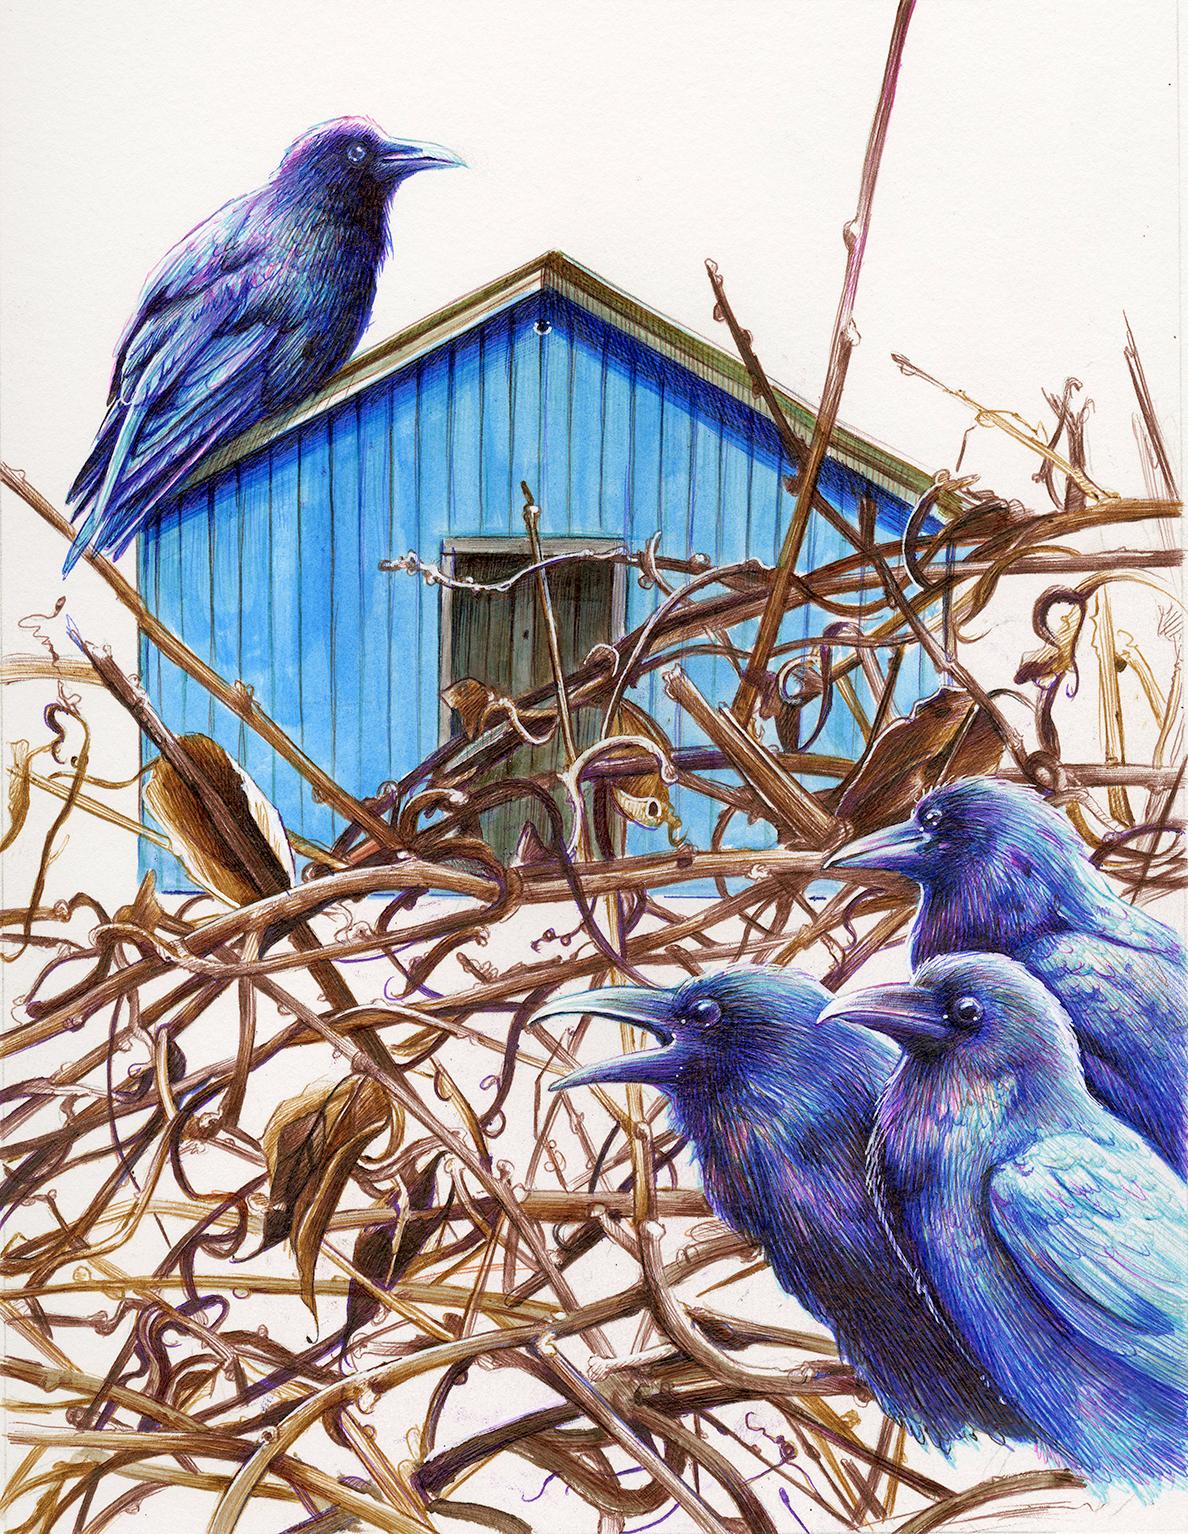 The Calling, Bower birds, drawing, framed work on paper, blue house, thicket